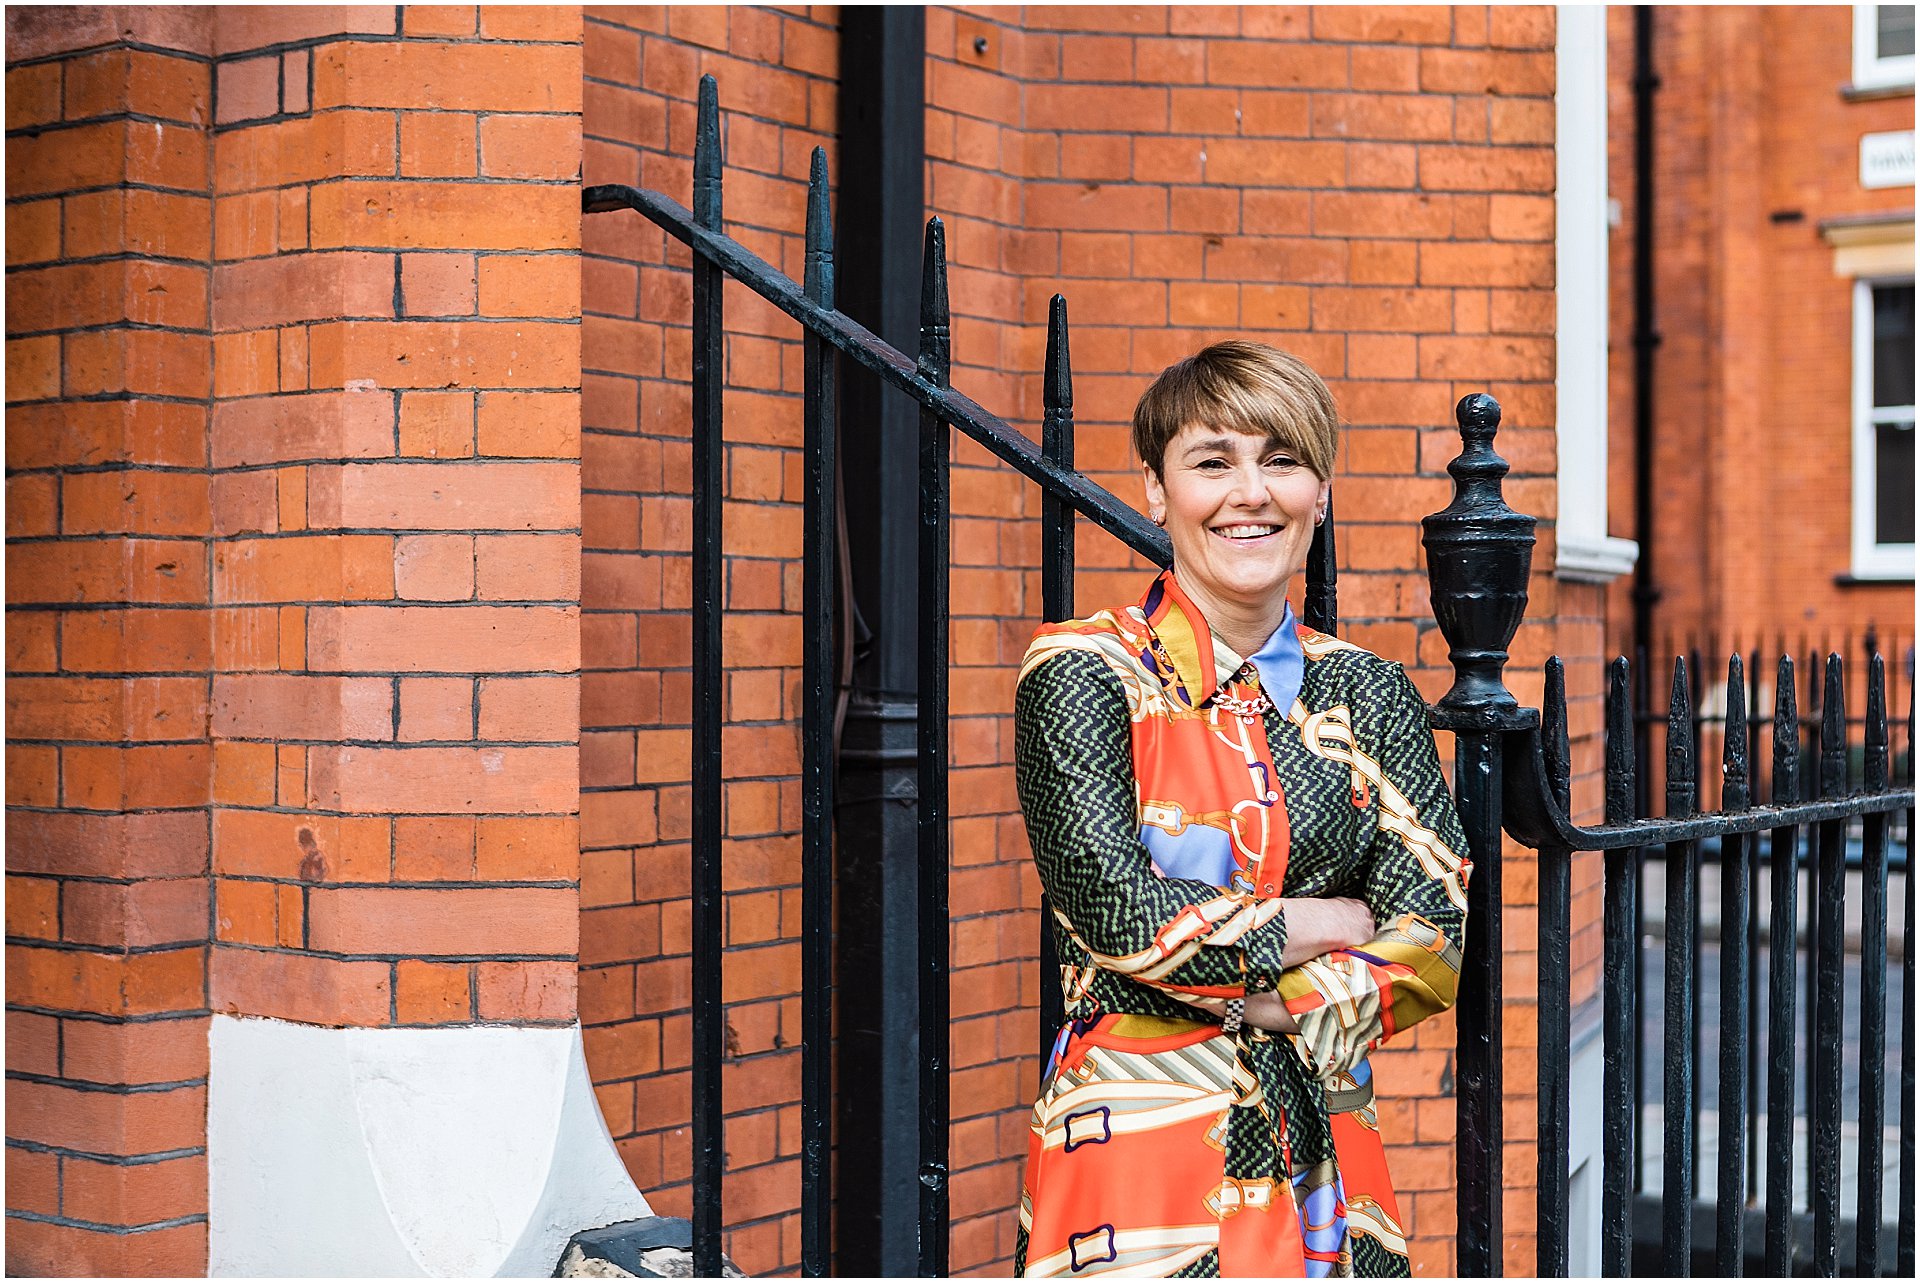 Lisa Talbot, stylist is standing in front of a red brick building. She is a wearing a patterned dress. Images by London brand photographer AKP Branding Stories